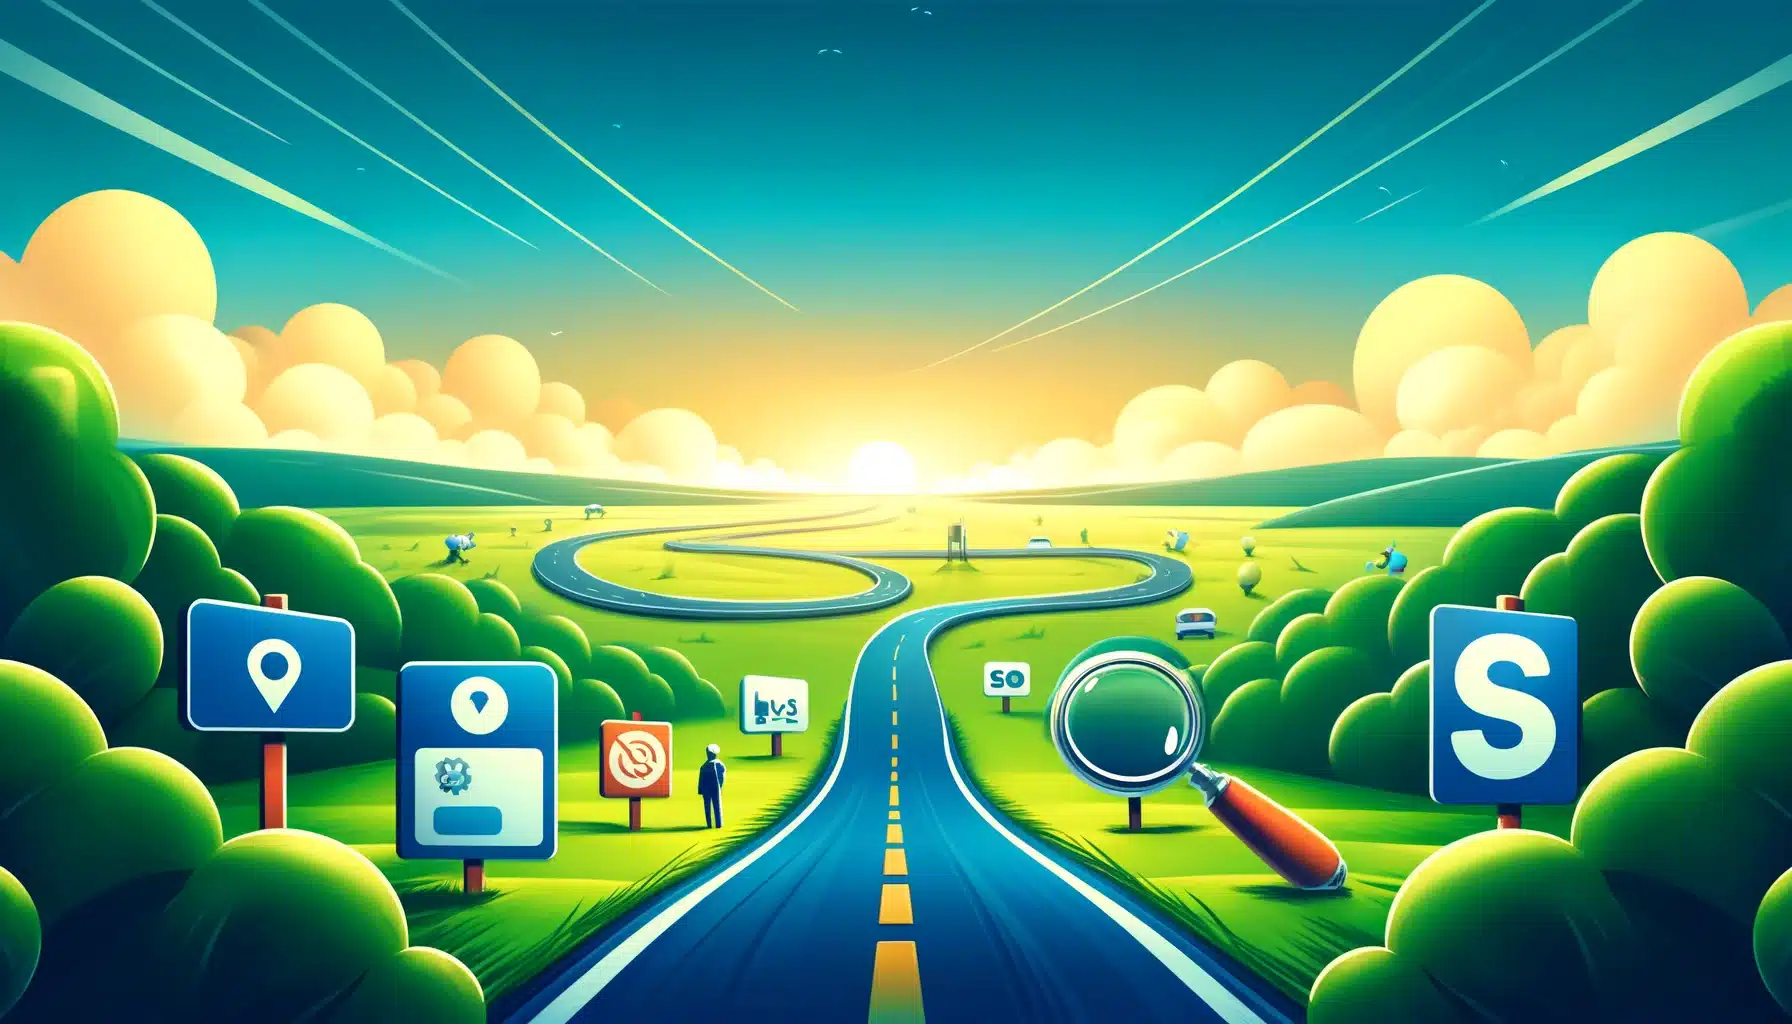 A vivid and simplified visual metaphor for seo as a 'long term strategy'. the image shows a long, winding road stretching far into the horizon.